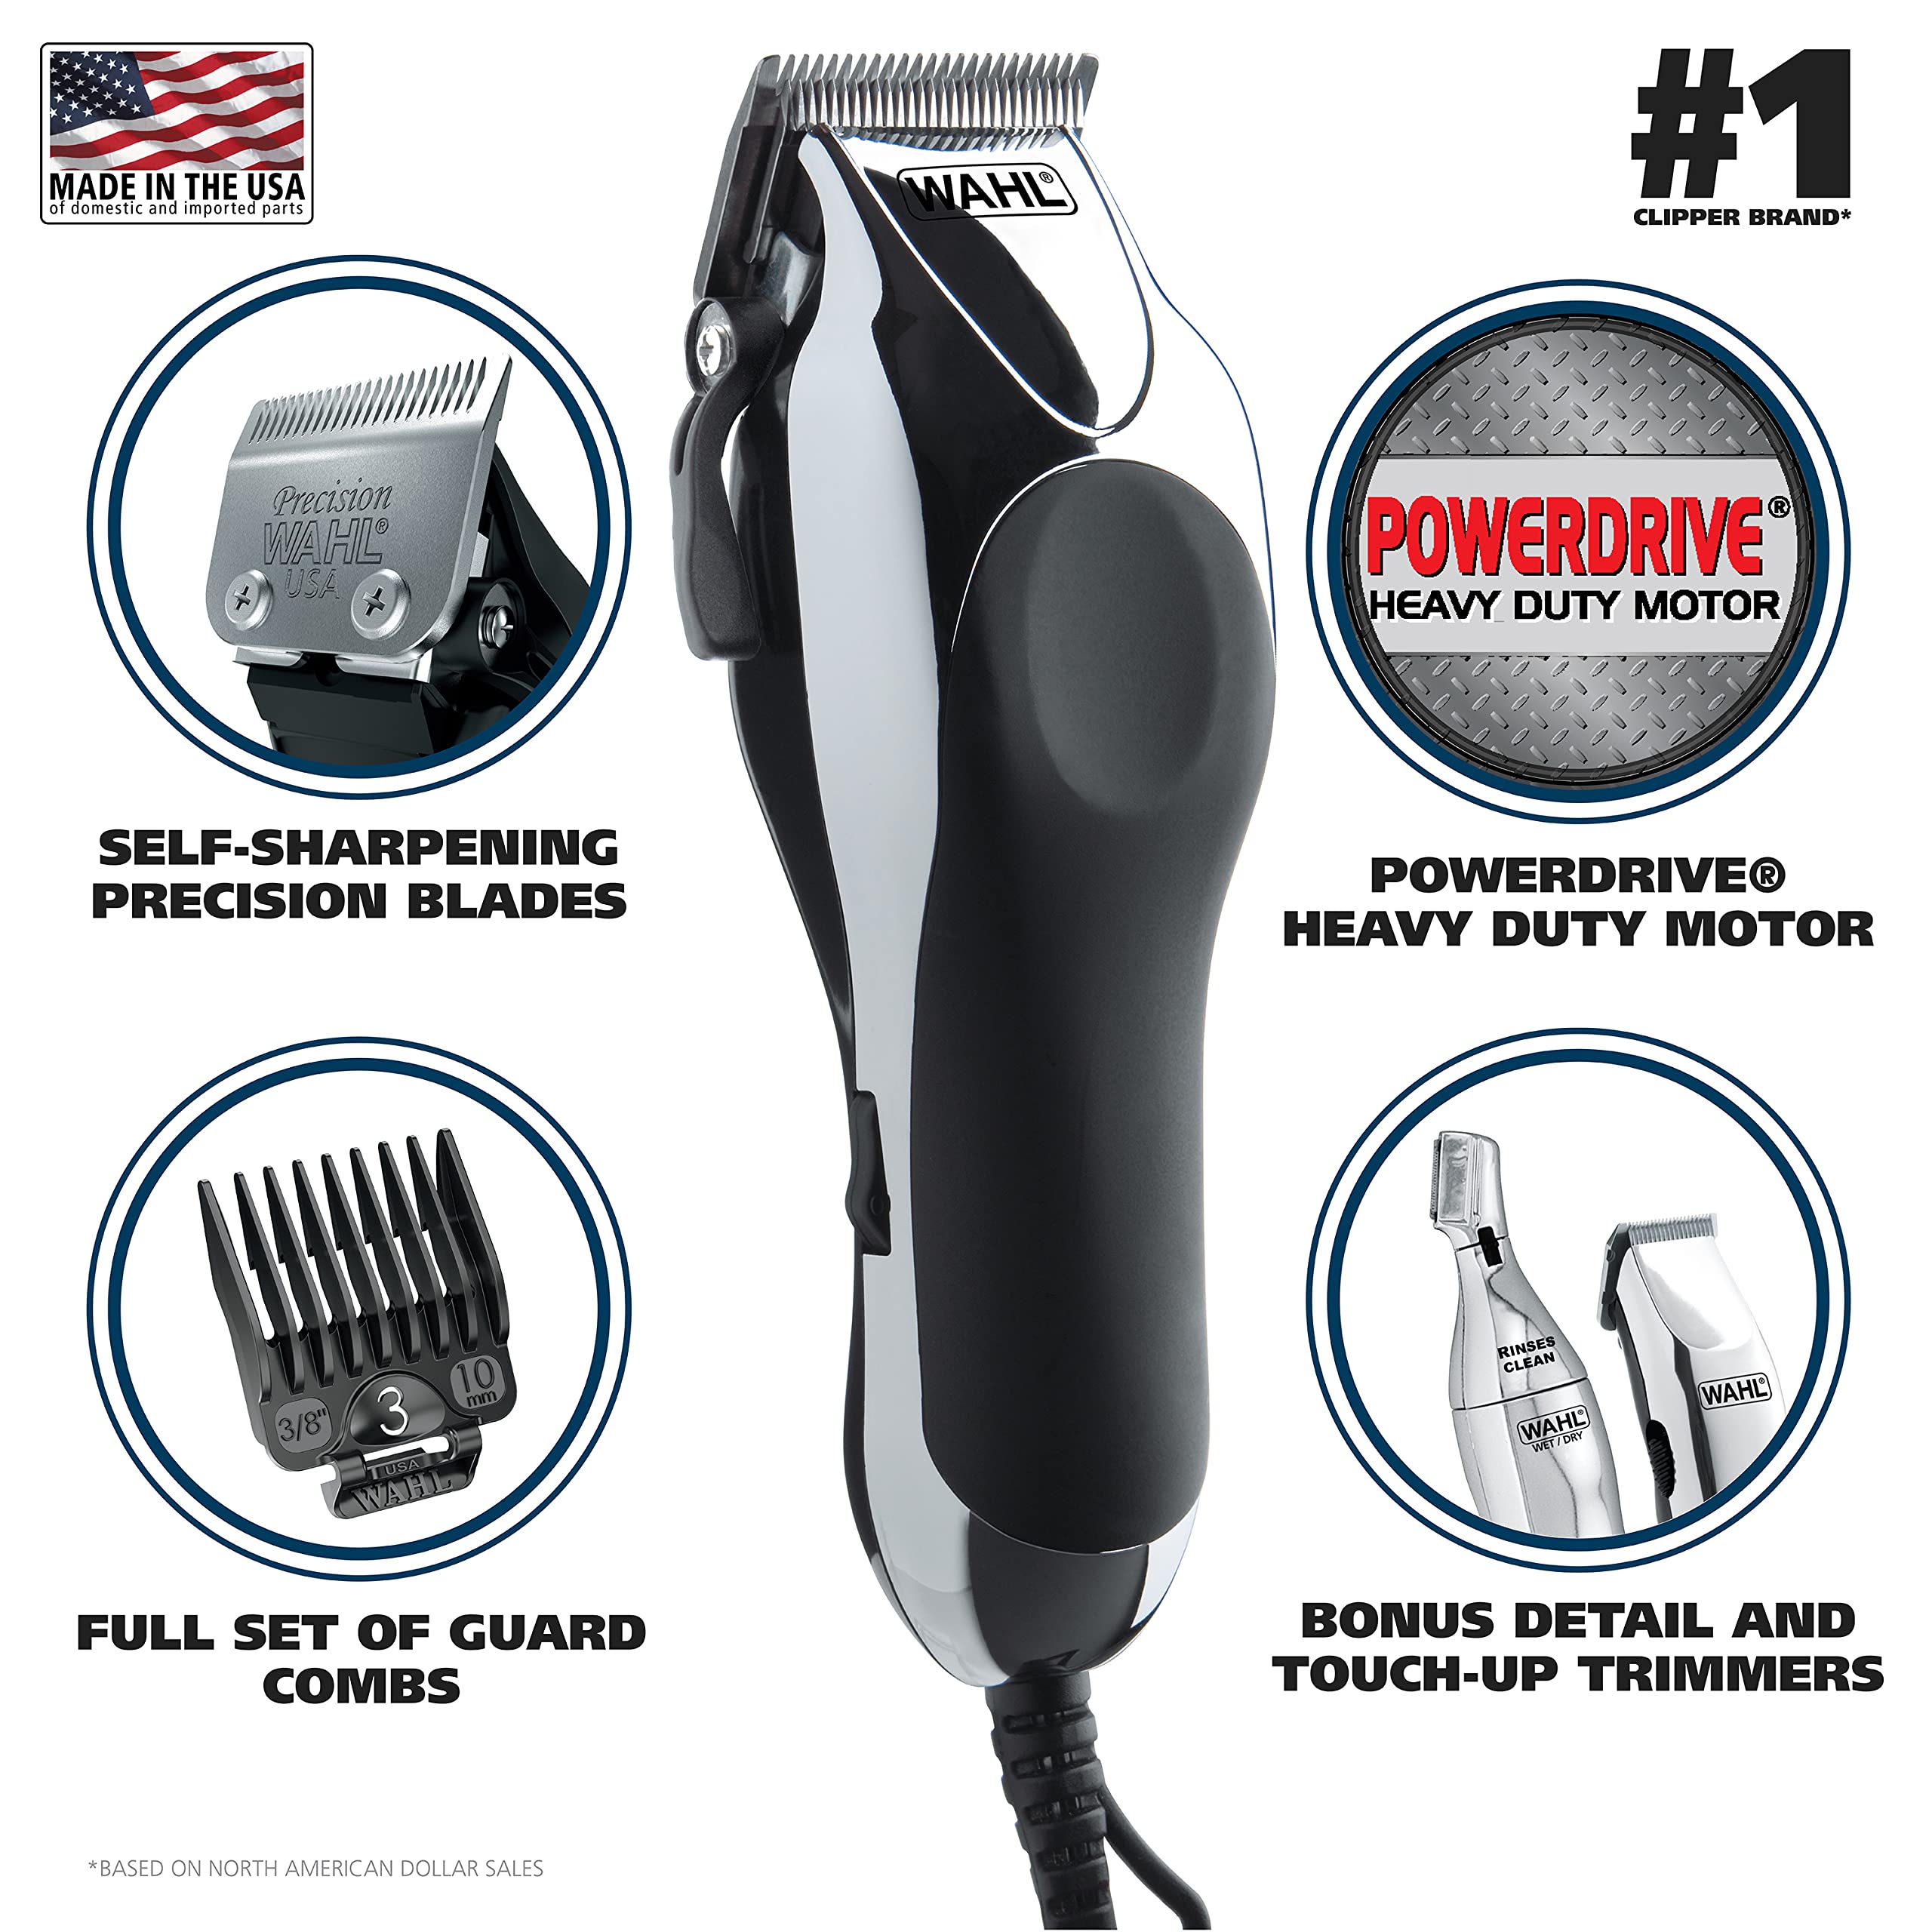 Wahl Clipper Home Barber Kit Electric Corded Clipper and Battery Touch Up Trimmer & Personal Groomer, 30 Piece Kit for Haircutting at Home – Model 79524-3001P